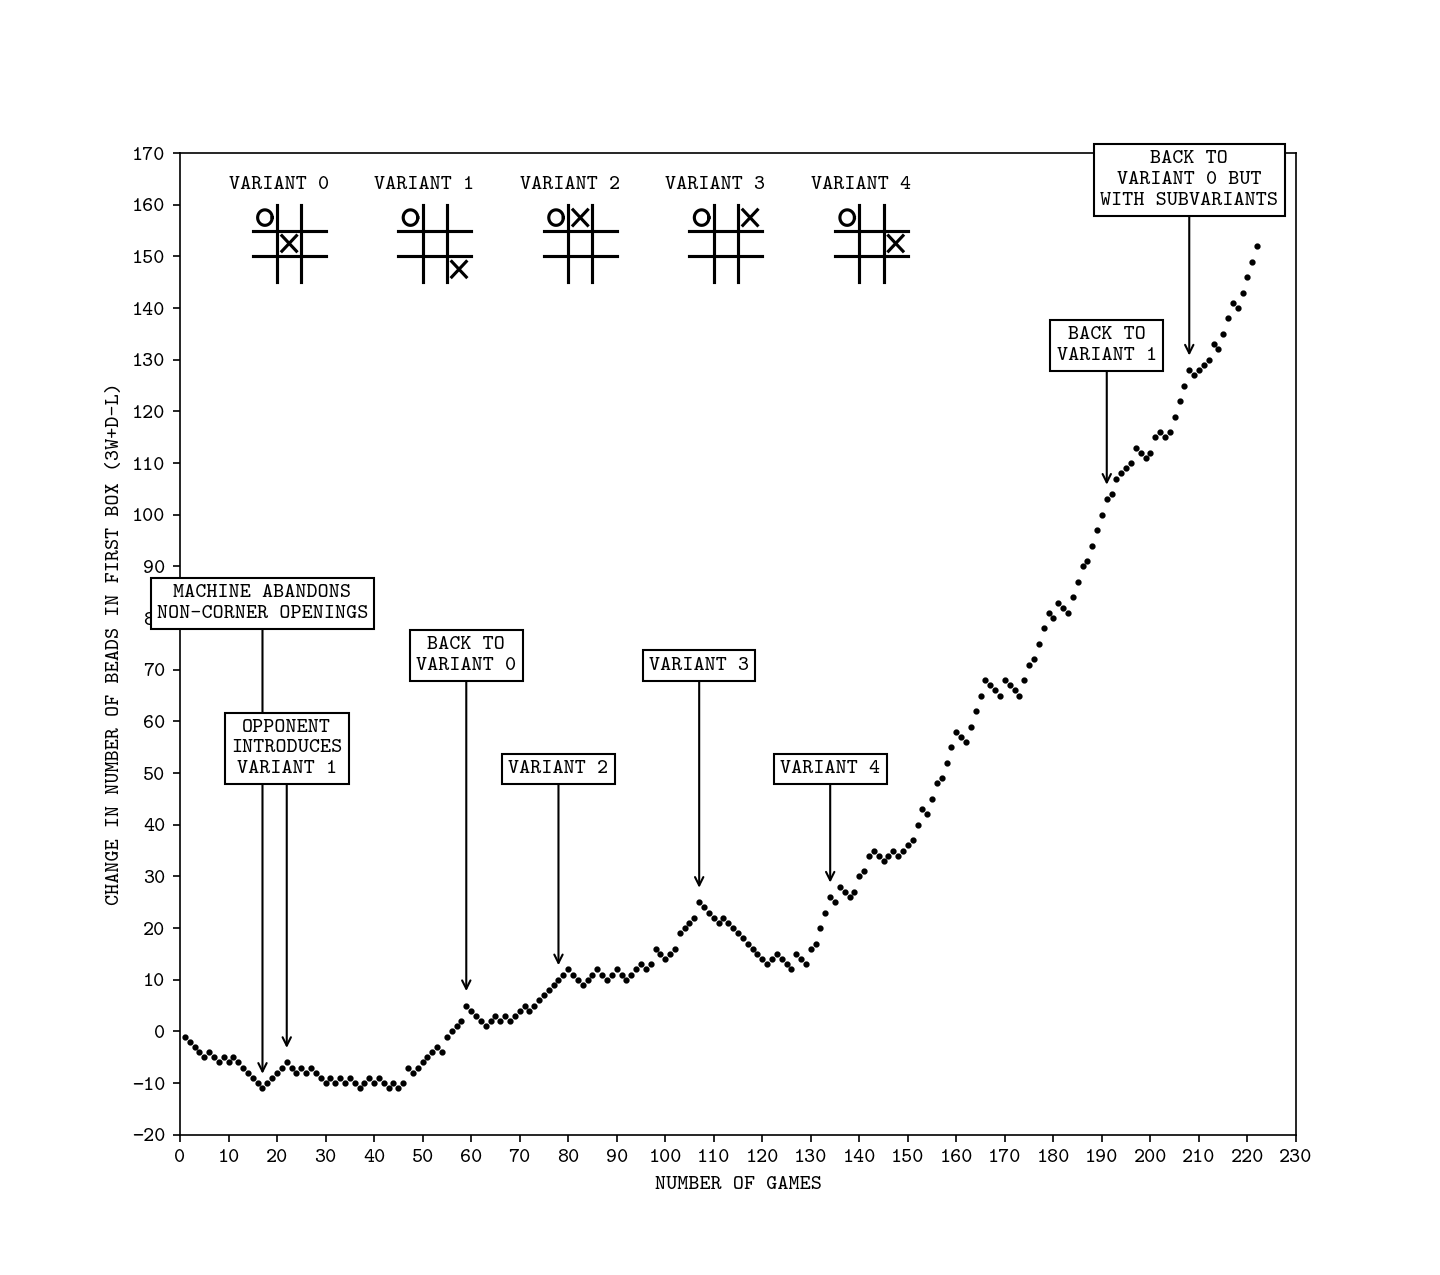 This graph shows the results of Donald Michie's games against MENACE. This is a recreation of a graph that was published in Michie's 1961 article Trial and error in Penguin Science Survey 2.